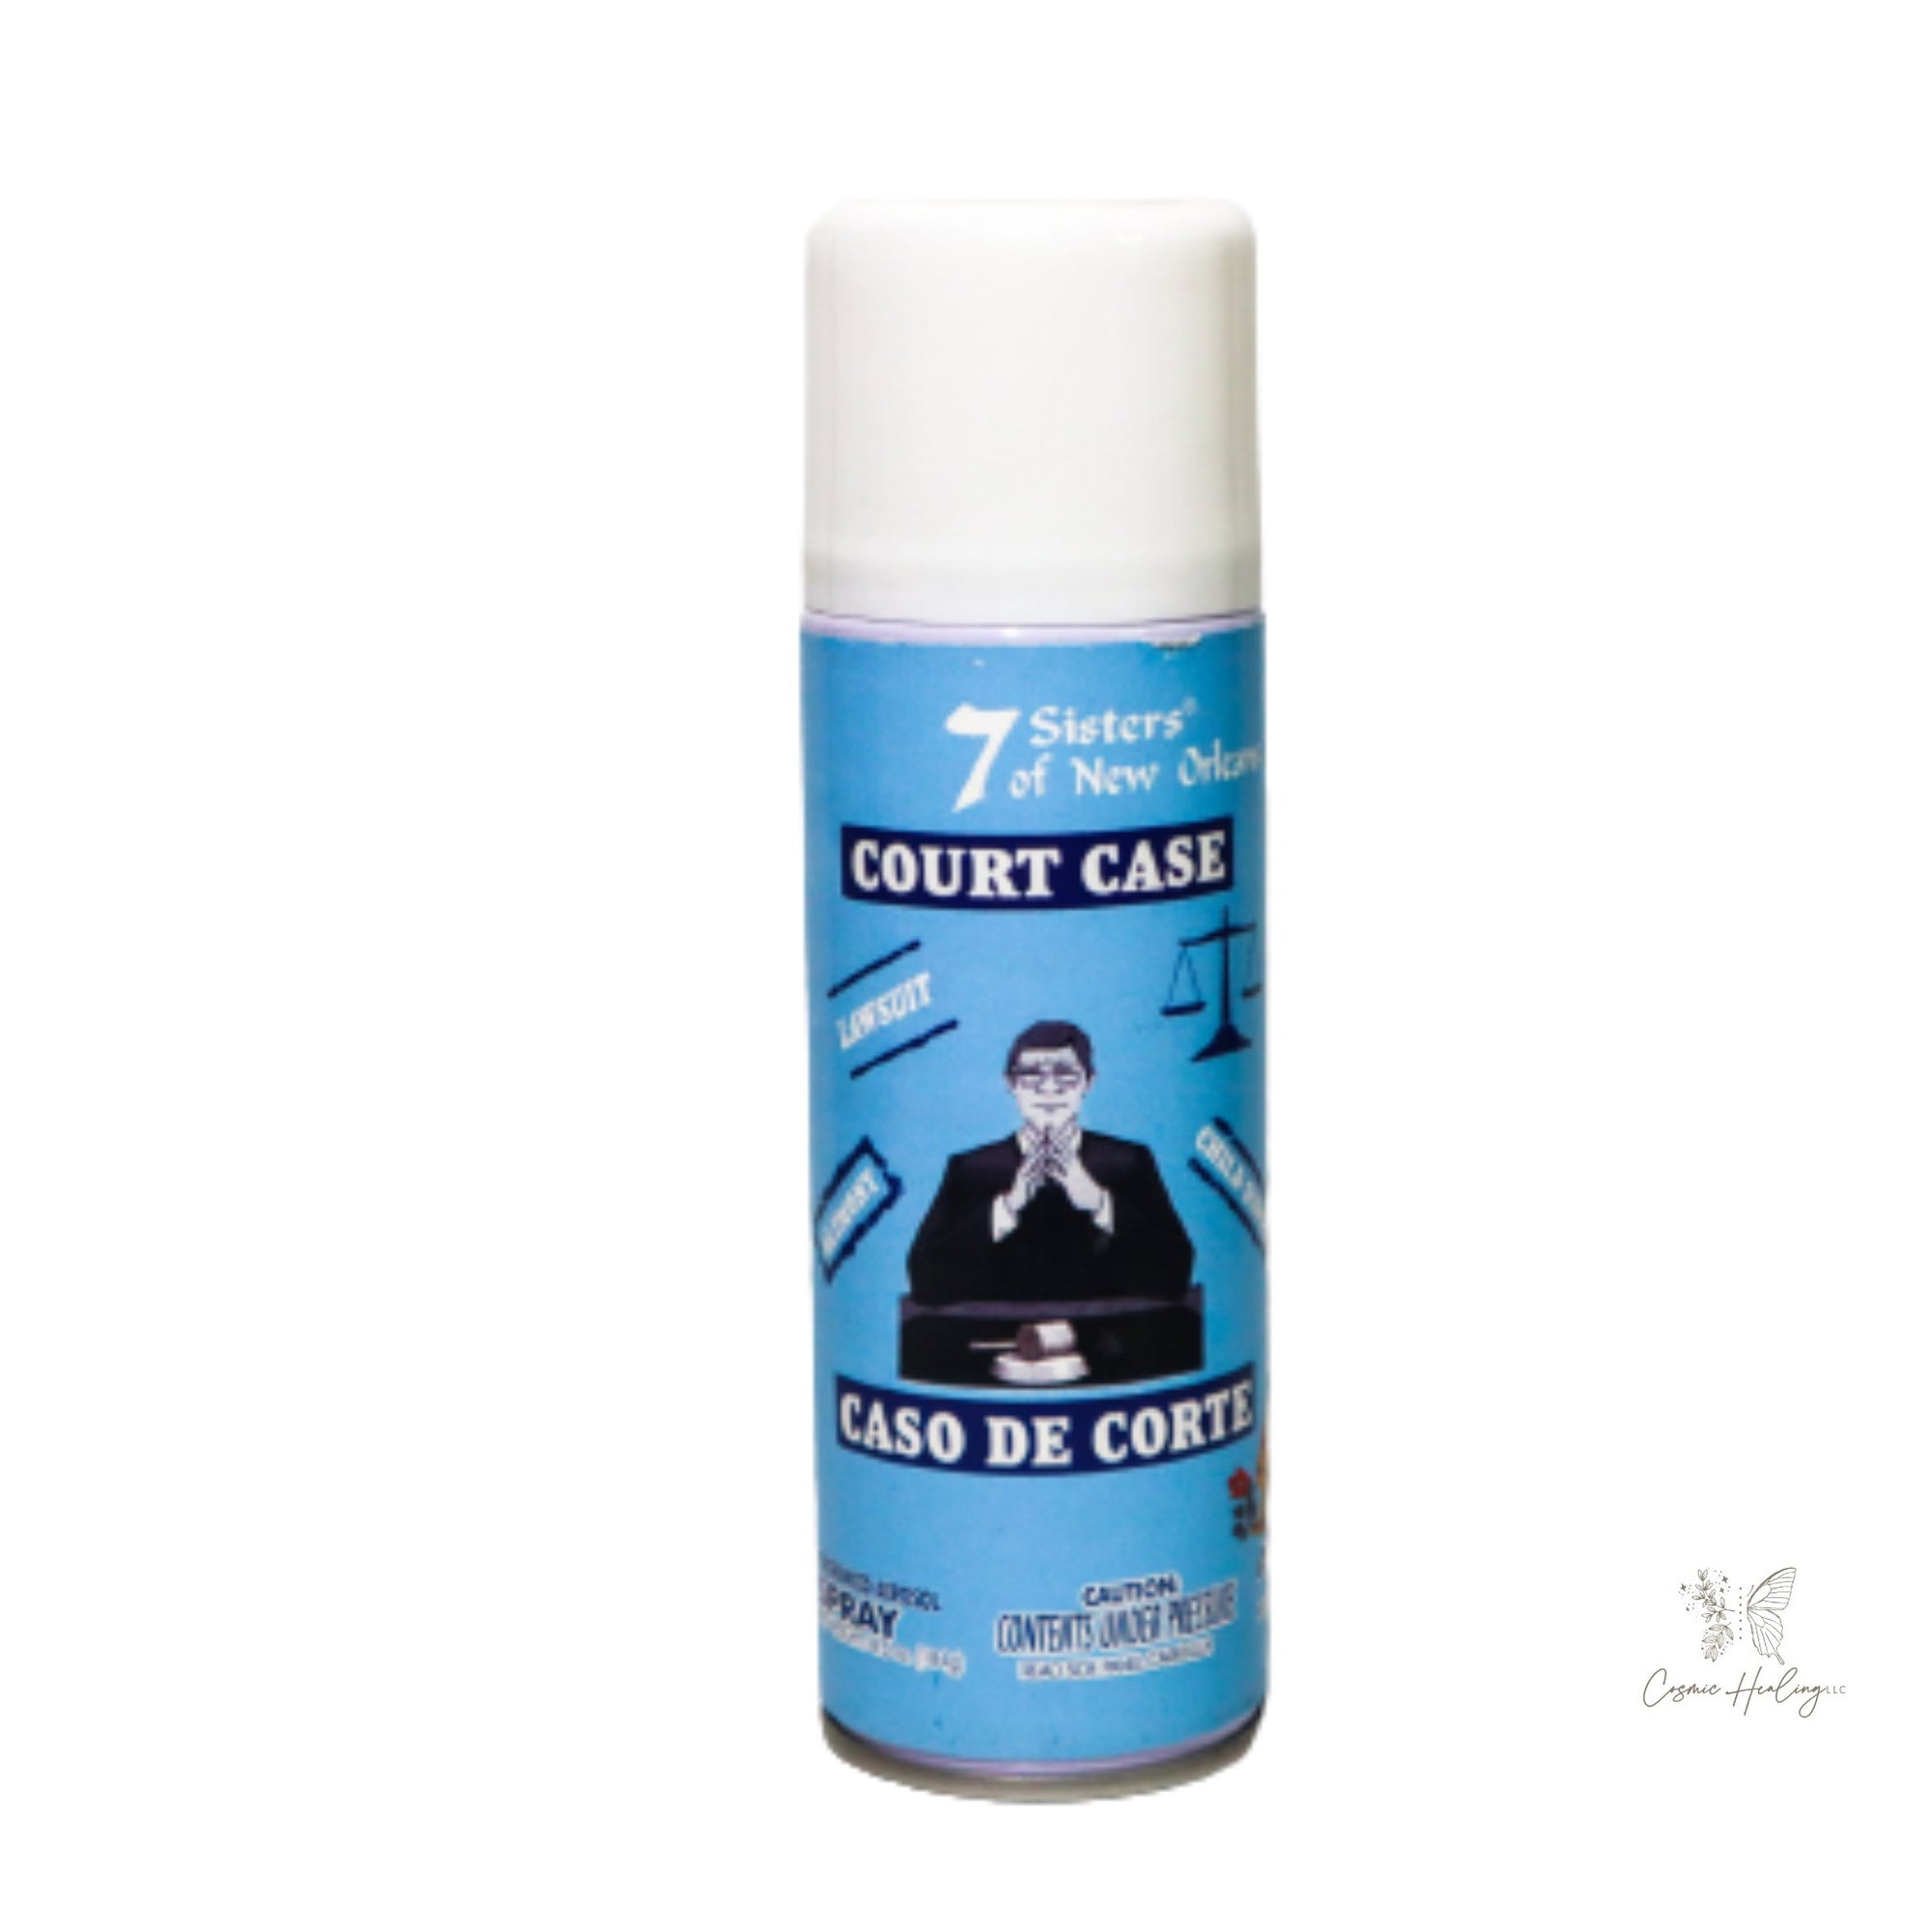 7 Sisters of New Orleans Court Case Aerosol Spray 6.5oz-(Caso de Corte) For Victory In Legal Issues, Police Problems, Court Cases, Restraining Orders, ETC. - Shop Cosmic Healing